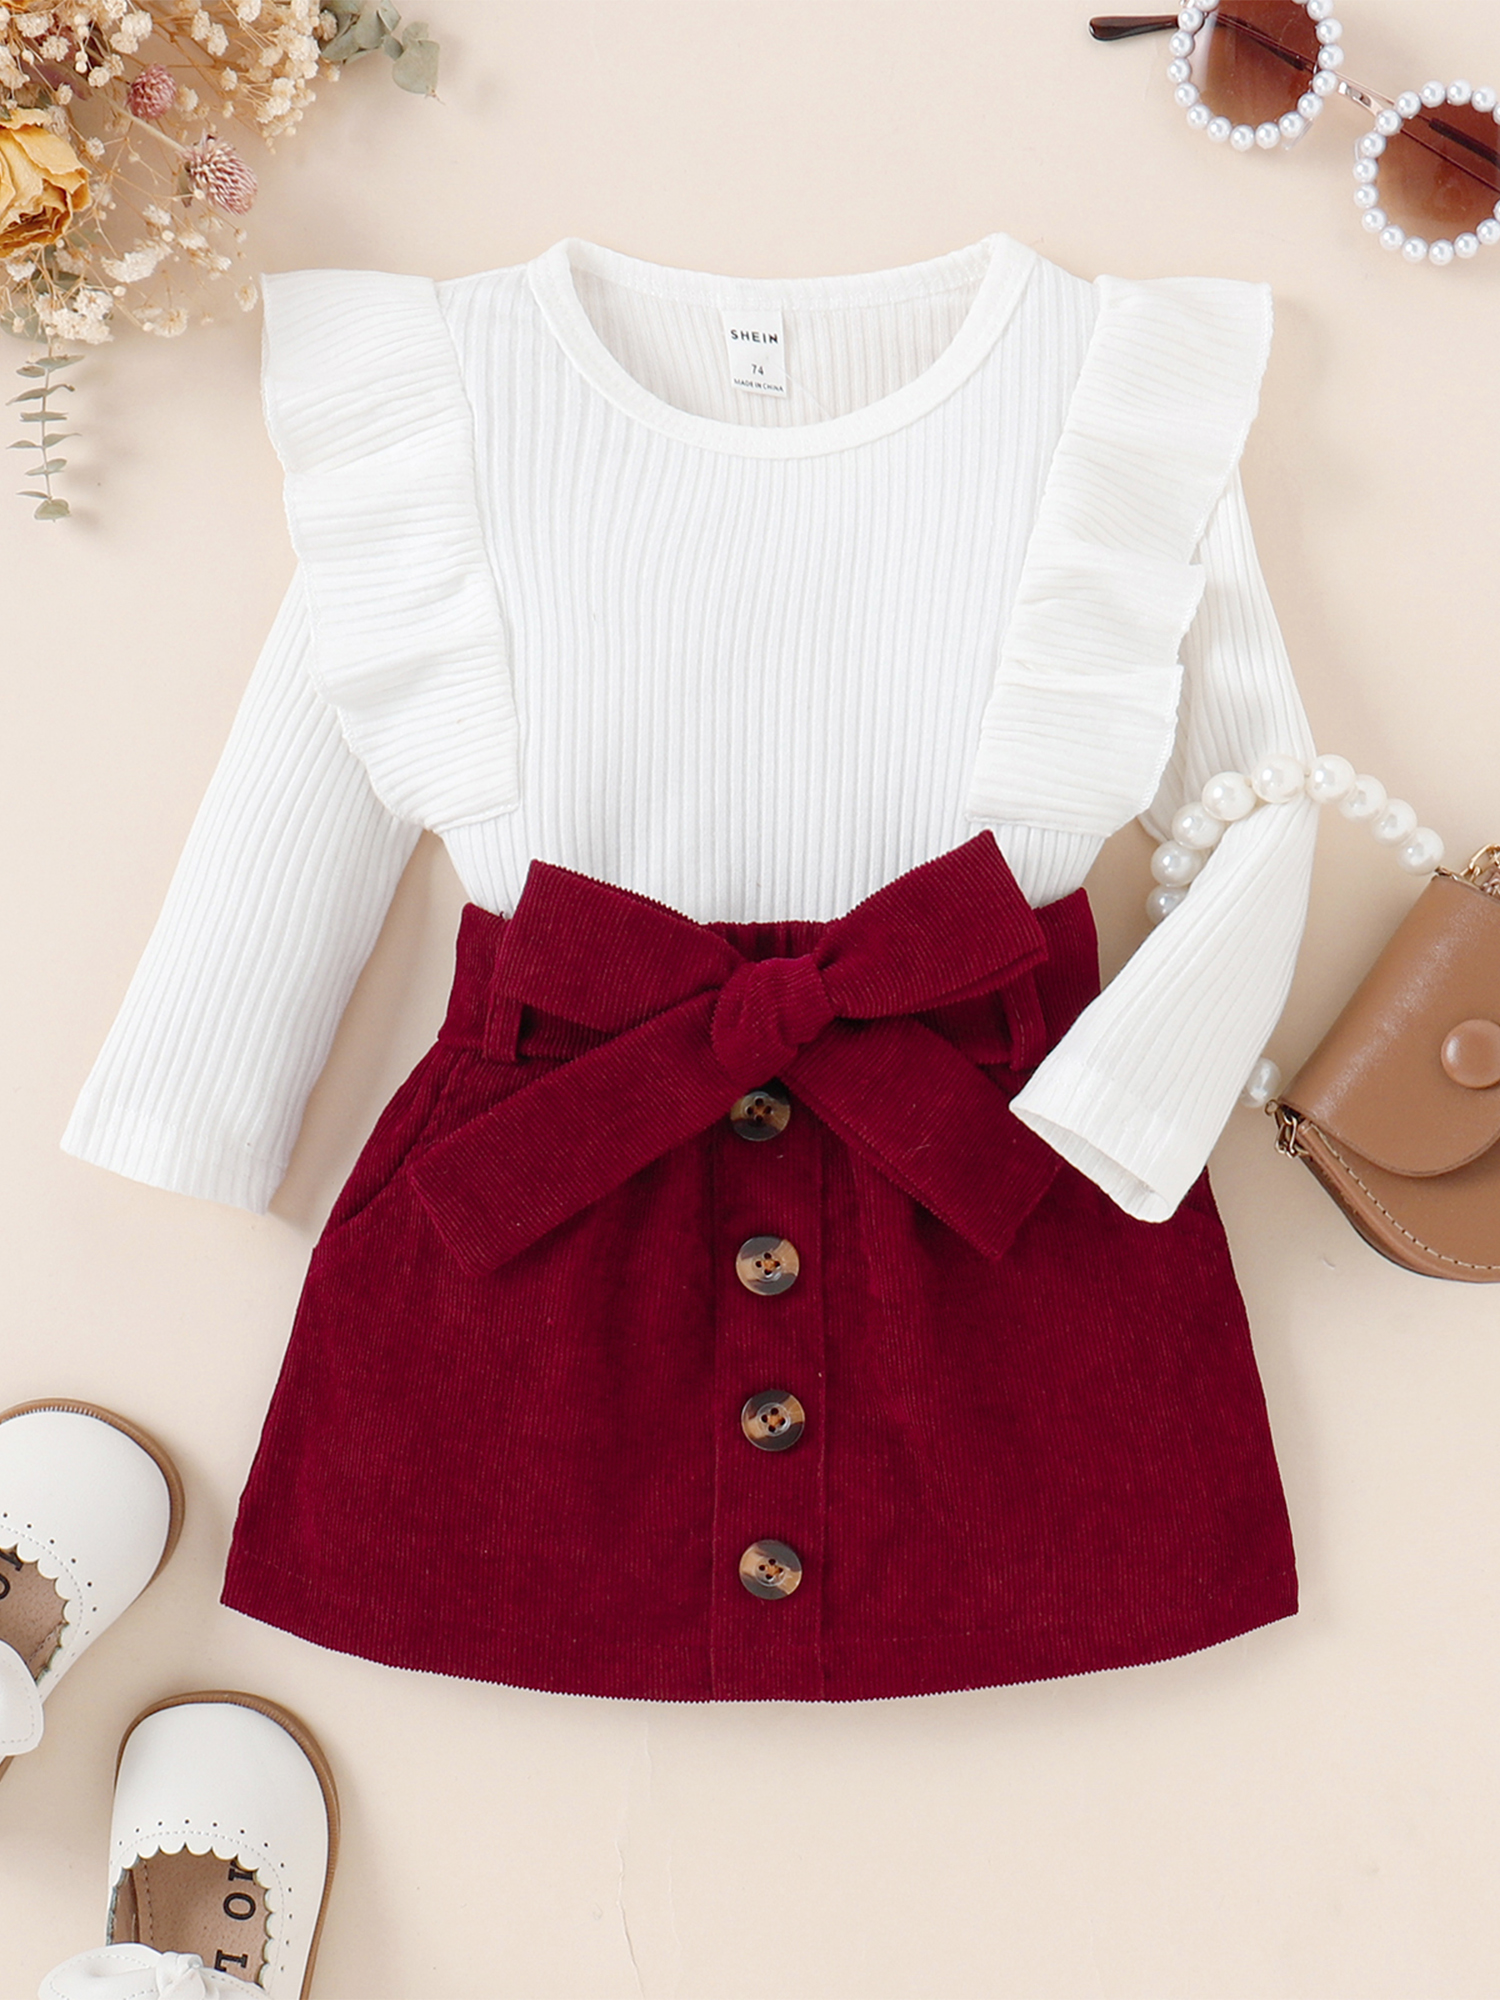 JYYYBF 0-24M Toddler Baby Girl Skirt Outfit Long Sleeve Ribbed Knitted  Pullover Mini Skirts 2pcs Fall Clothes White Wine Red 6-9 Months -  